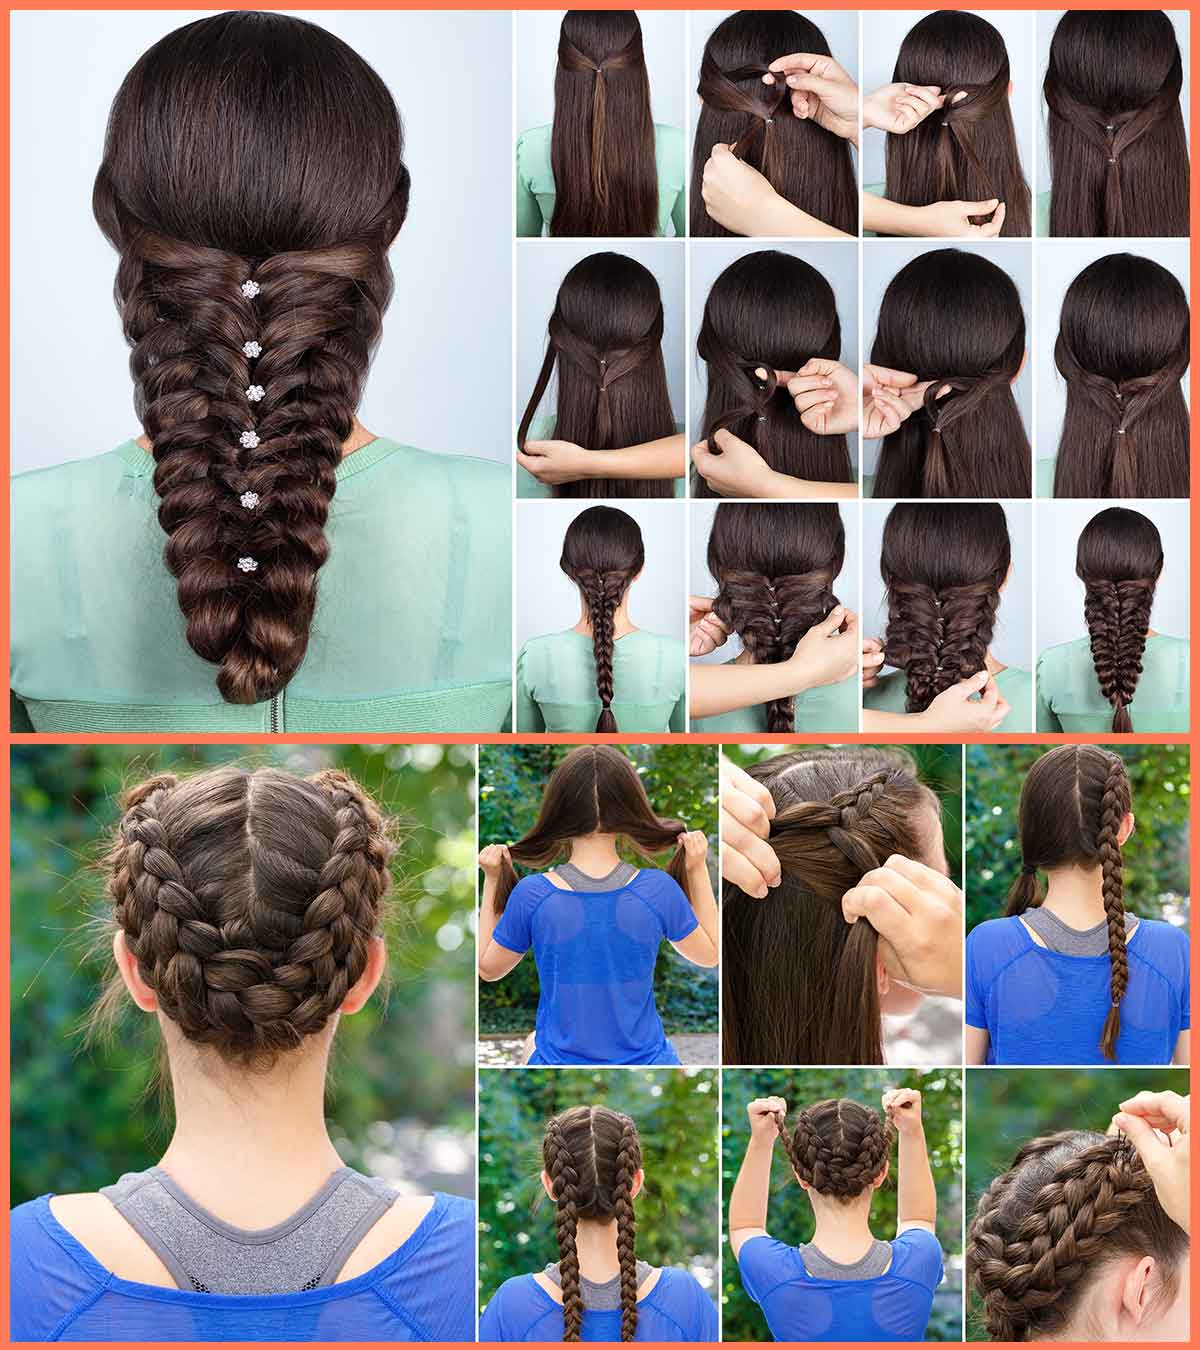 Braided Hairstyle Simple  Easy Braided Hairstyle for Types of Hair